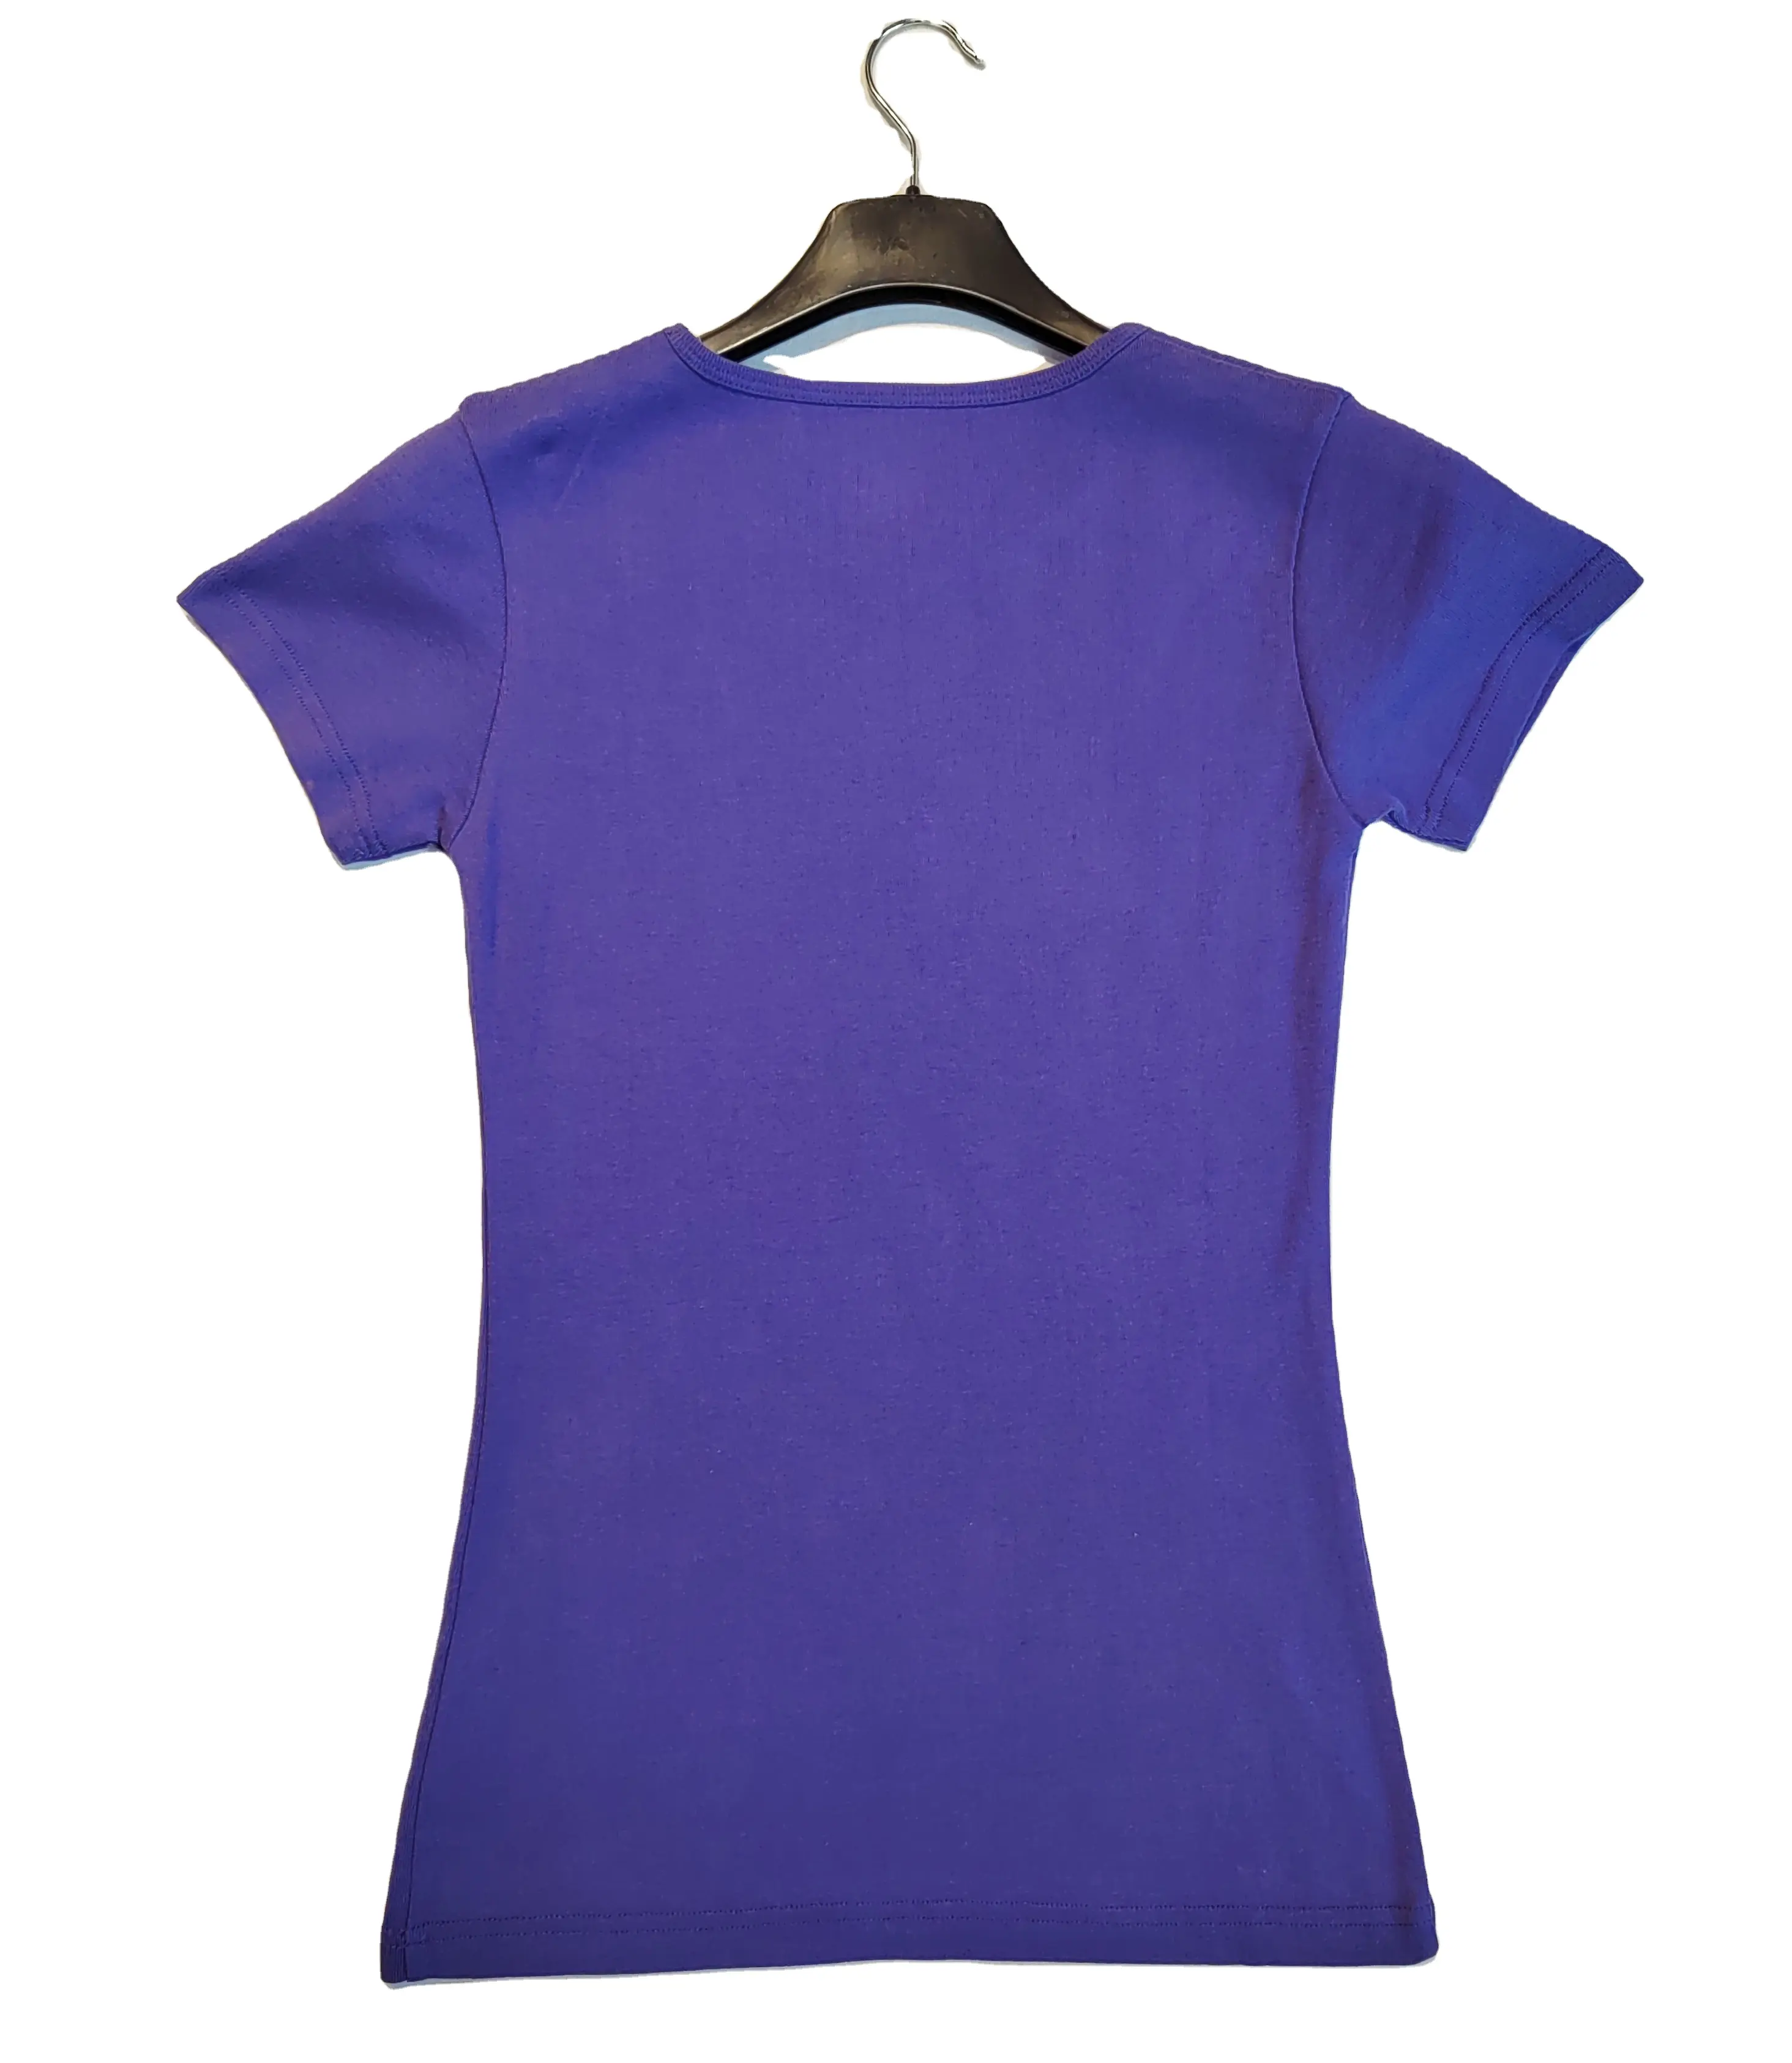 Factory price wholesale superior quality tops and t shirt womans plain colors pink purple summer t-shirts for women 100% cotton